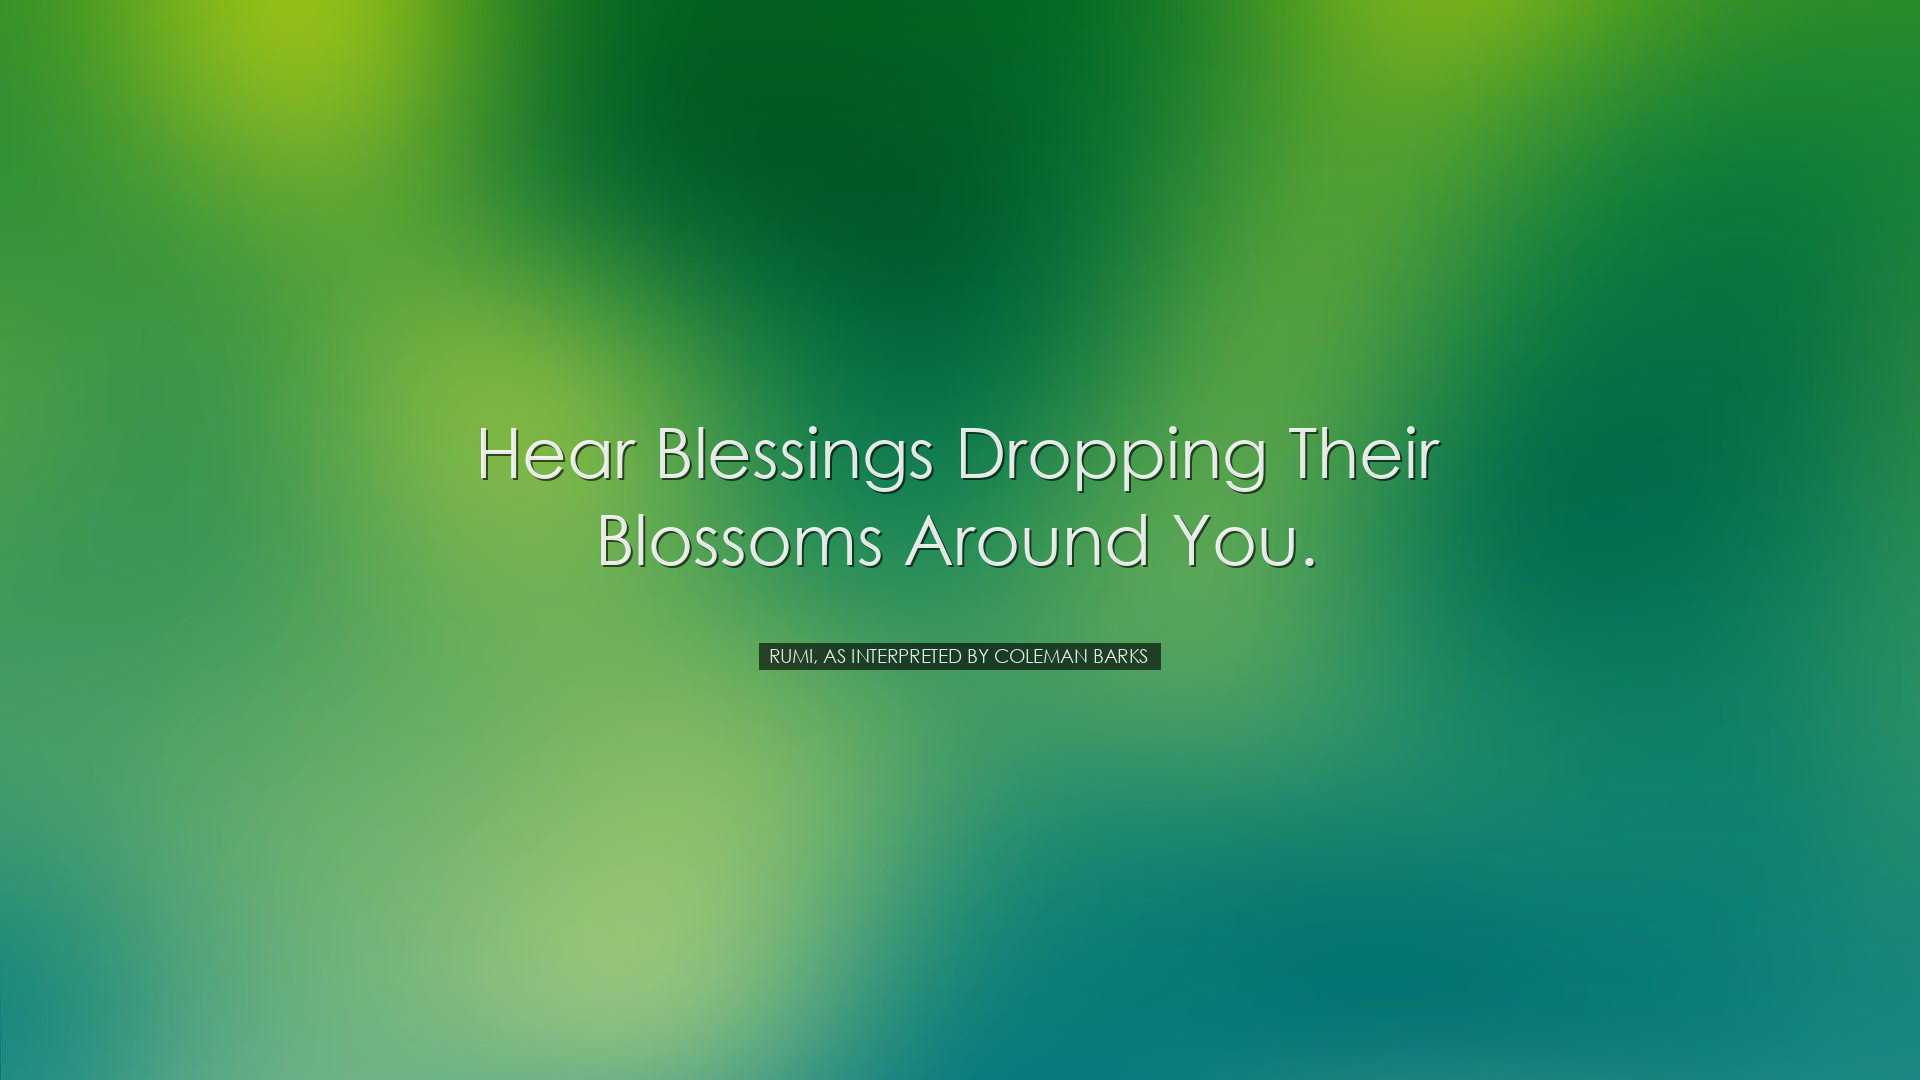 Hear blessings dropping their blossoms around you. - Rumi, as inte